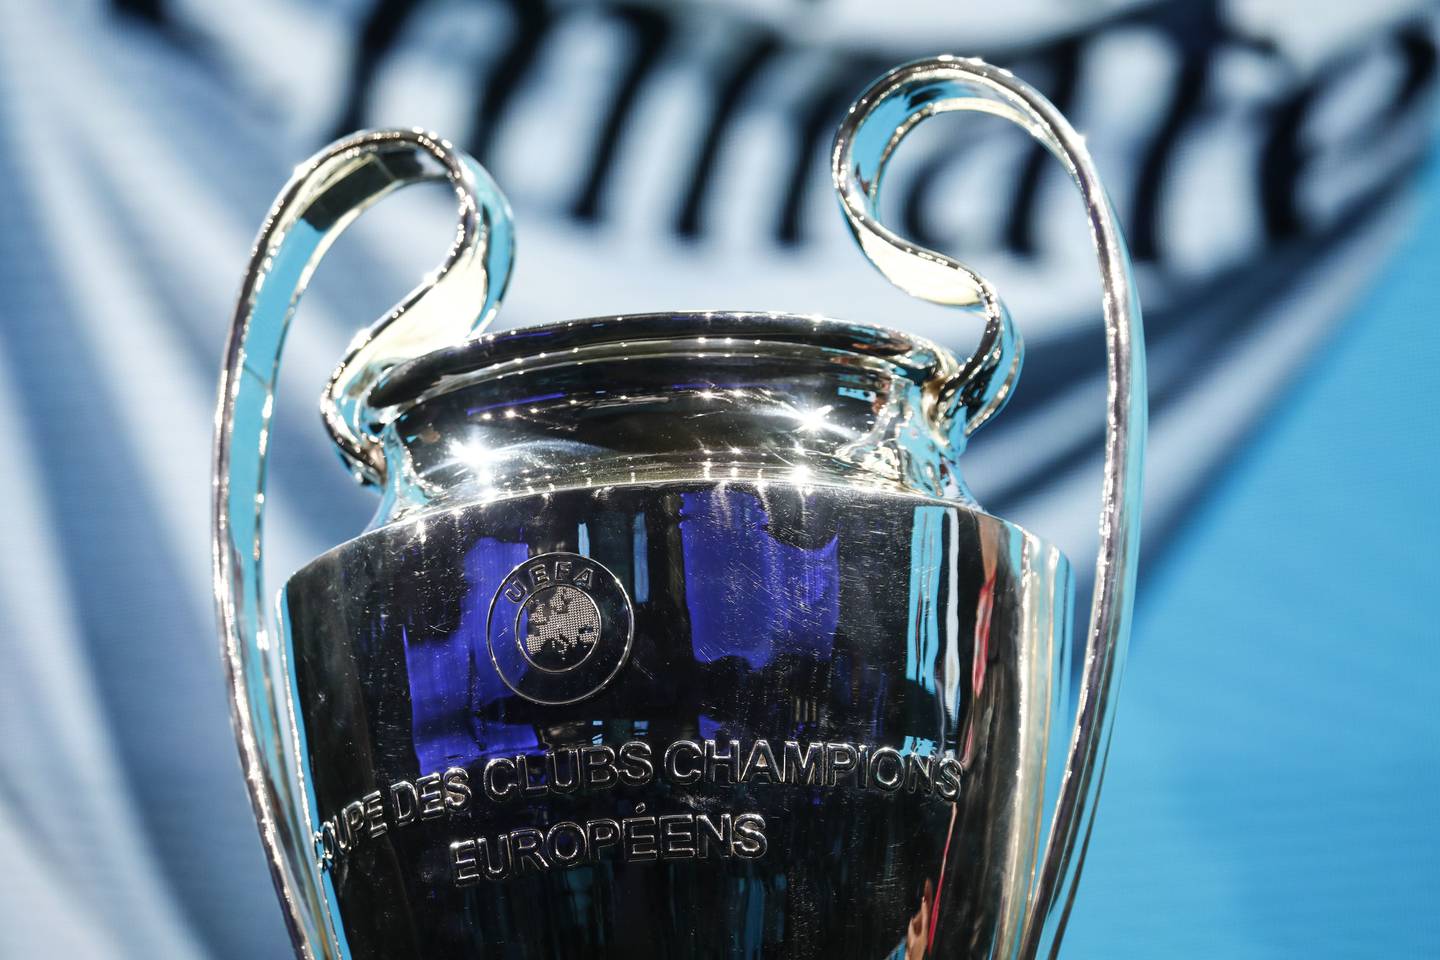 The Union of European Football Associations' (UEFA) Champions League trophy is displayed on stage as a trailer for the FIFA 19 soccer video game is shown during an Electronic Arts Inc. (EA) Play event ahead of the E3 Electronic Entertainment Expo in Los Angeles, California, U.S., on Saturday, June 9, 2018. EA announced that it is introducing a higher-end version of its subscription game-playing service that will include new titles such as Battlefield V and the Madden NFL 19 football game. Photographer: Patrick T. Fallon/Bloomberg